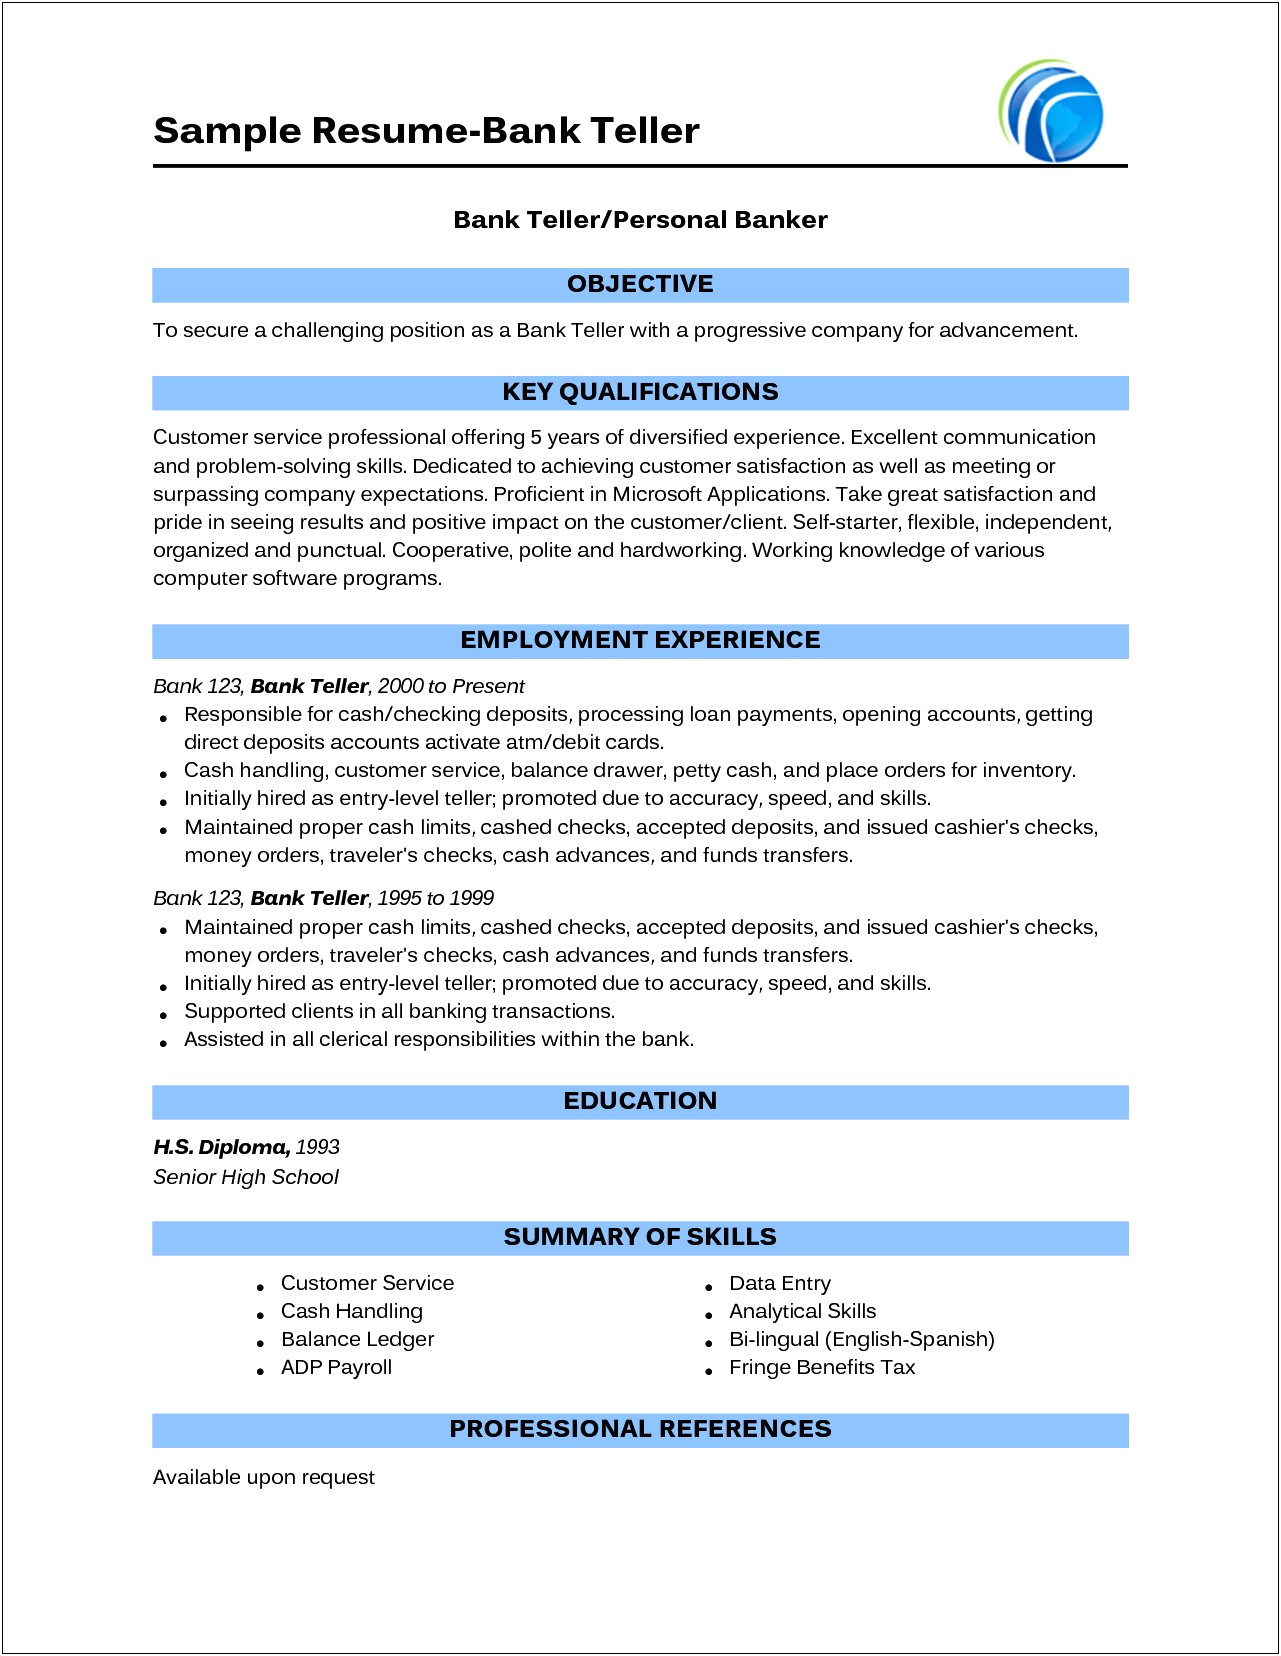 Best Objective For Banks In A Resume